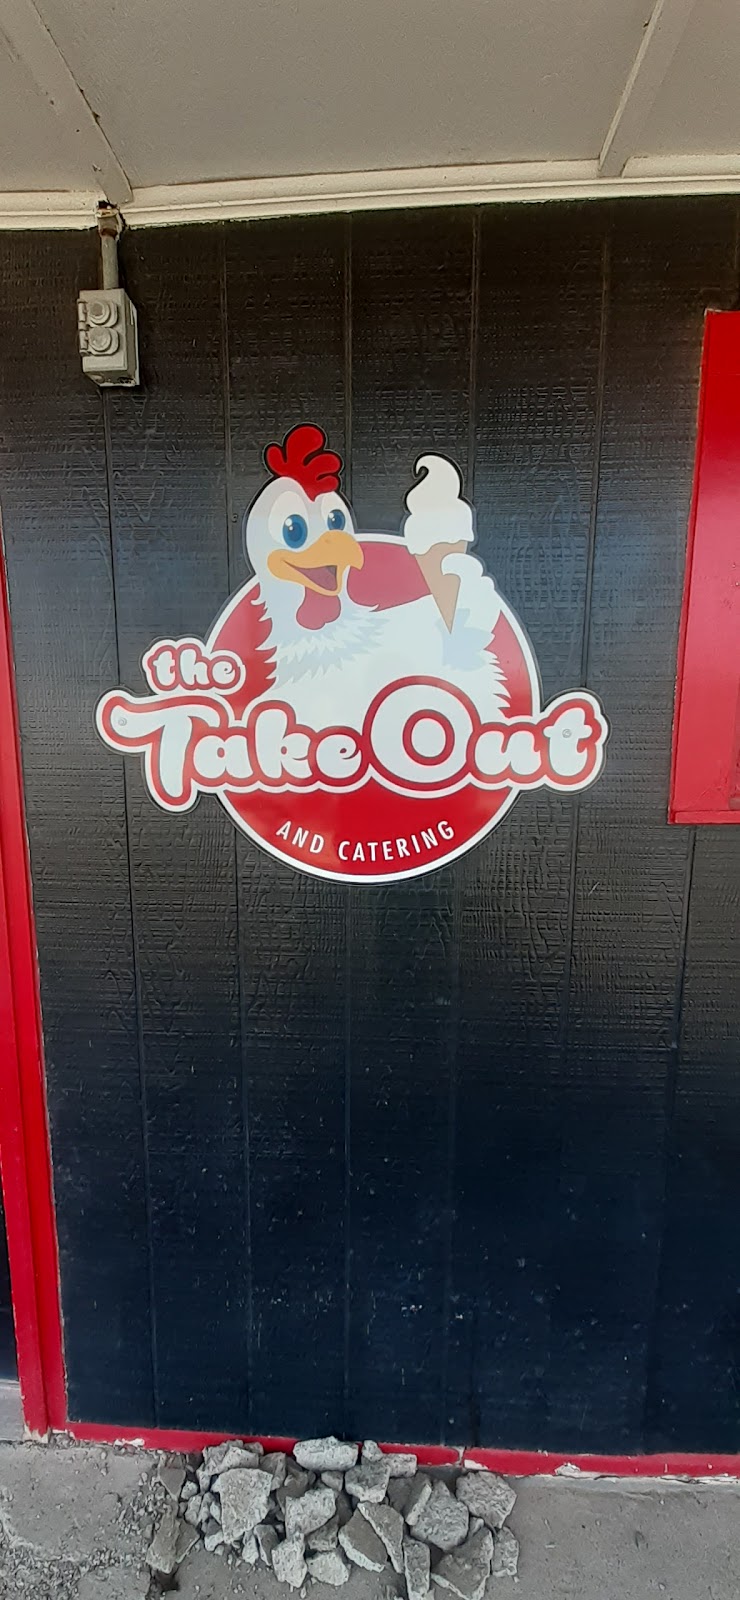 The Take Out | meal takeaway | 808 E 3rd St, Miller, SD 57362, USA | 6058930101 OR +1 605-893-0101